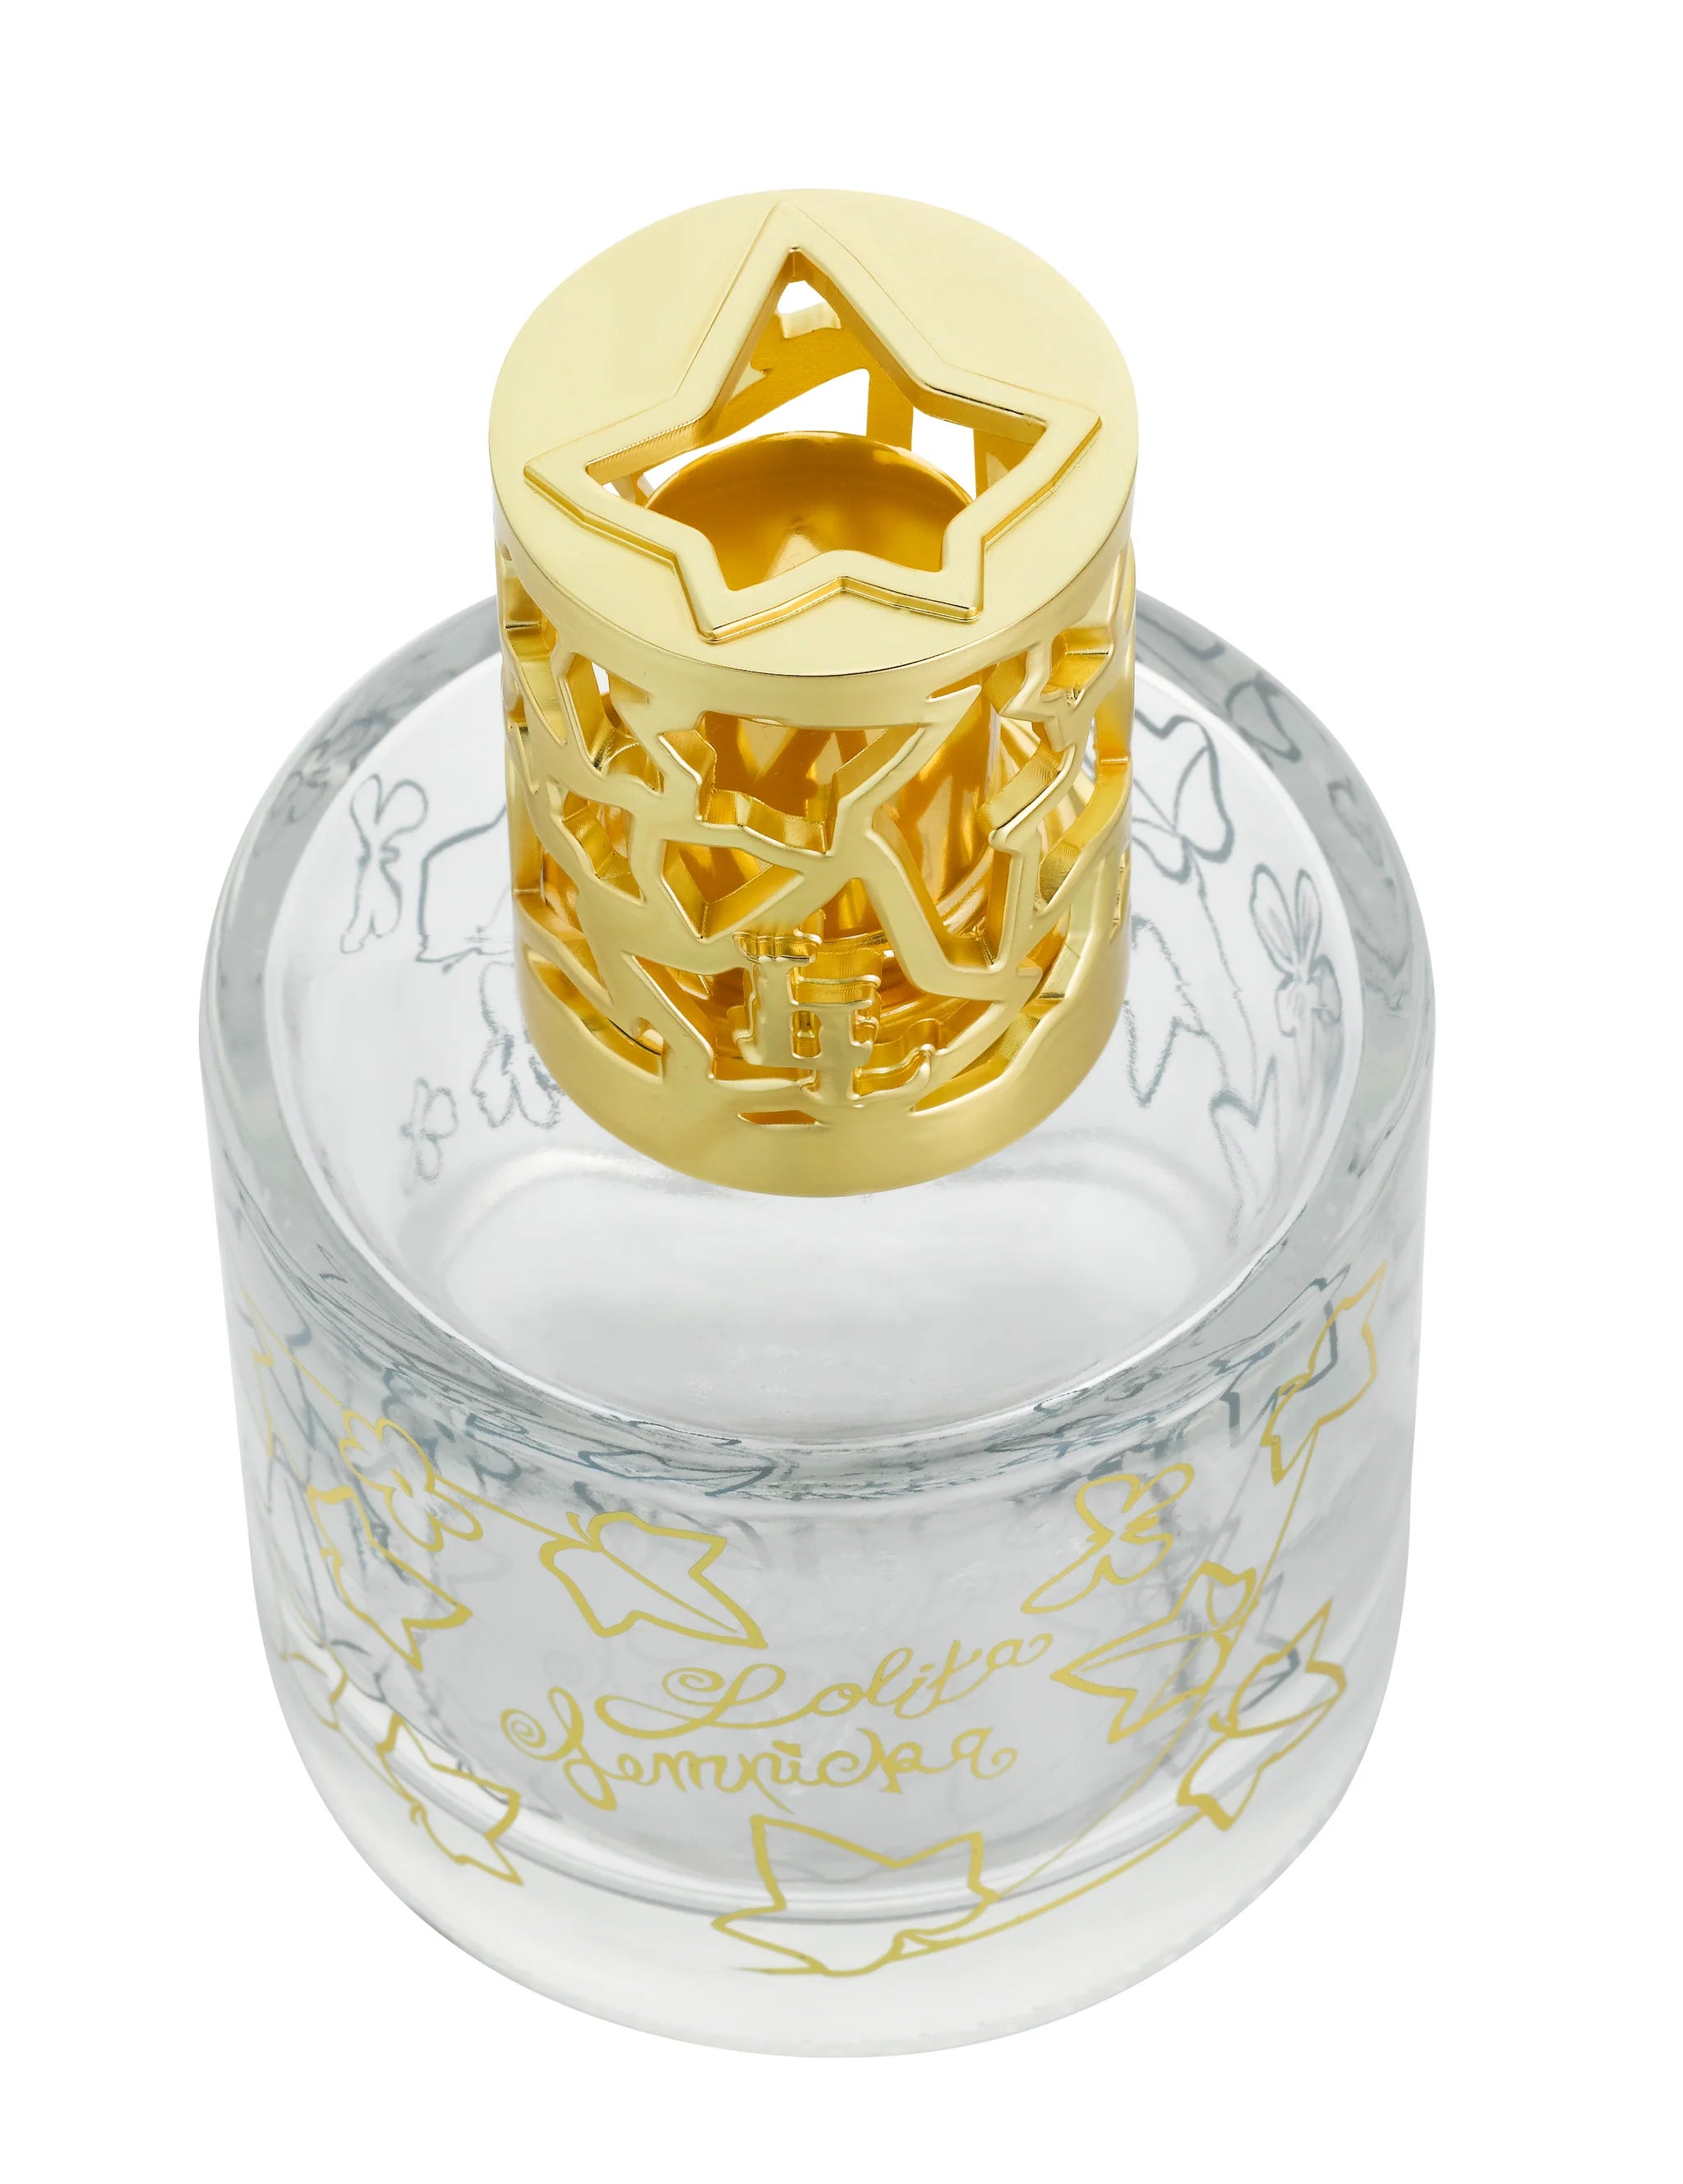 Maison Berger Paris BELUX - 🦋Maison Berger Paris x Lolita Lempicka🦋 The  collaboration of Maison Berger with Lolita Lempicka is blurring the line  between perfuming yourself and perfuming your home. The iconic